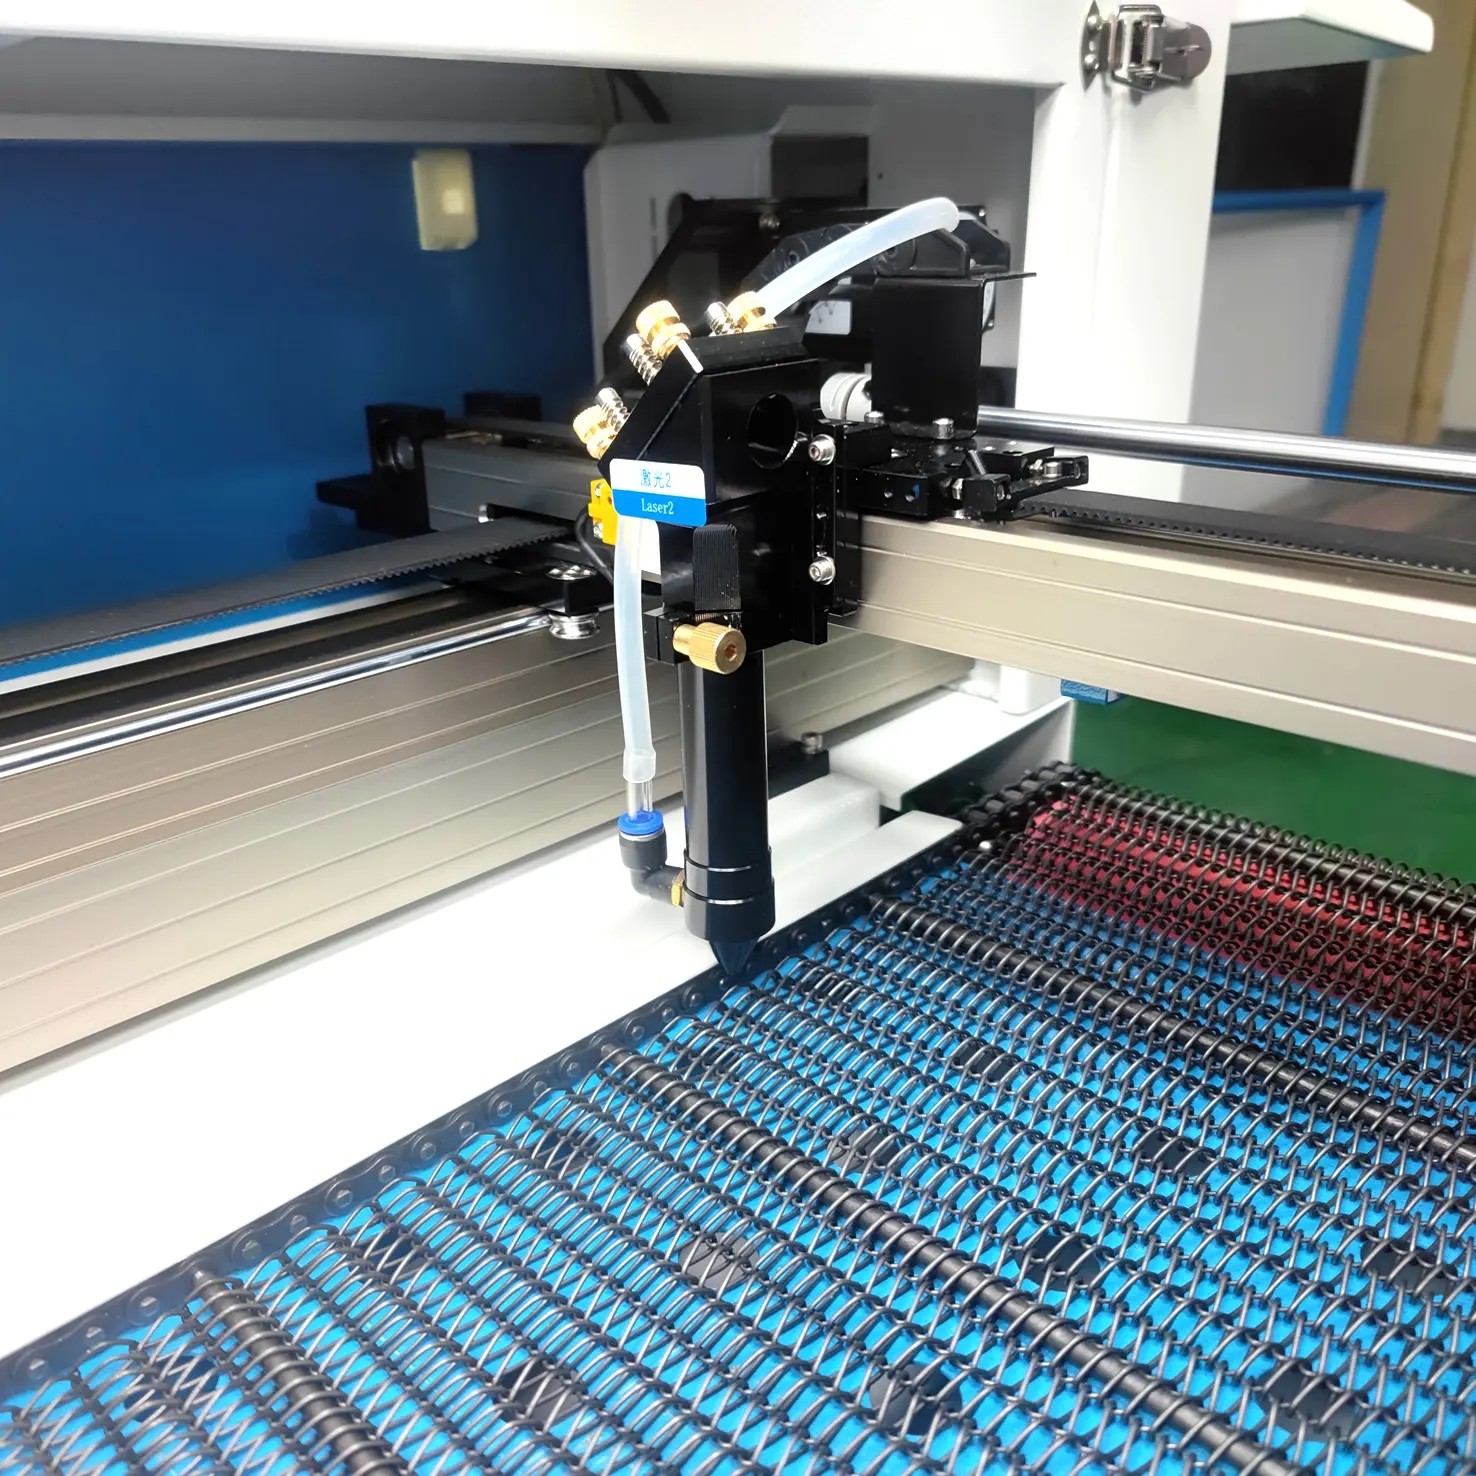 Top Quality Cut Laser Fabric Printed Sublimation Fabric Laser Cutting Machine With 2 Asynchronous Cu / 1